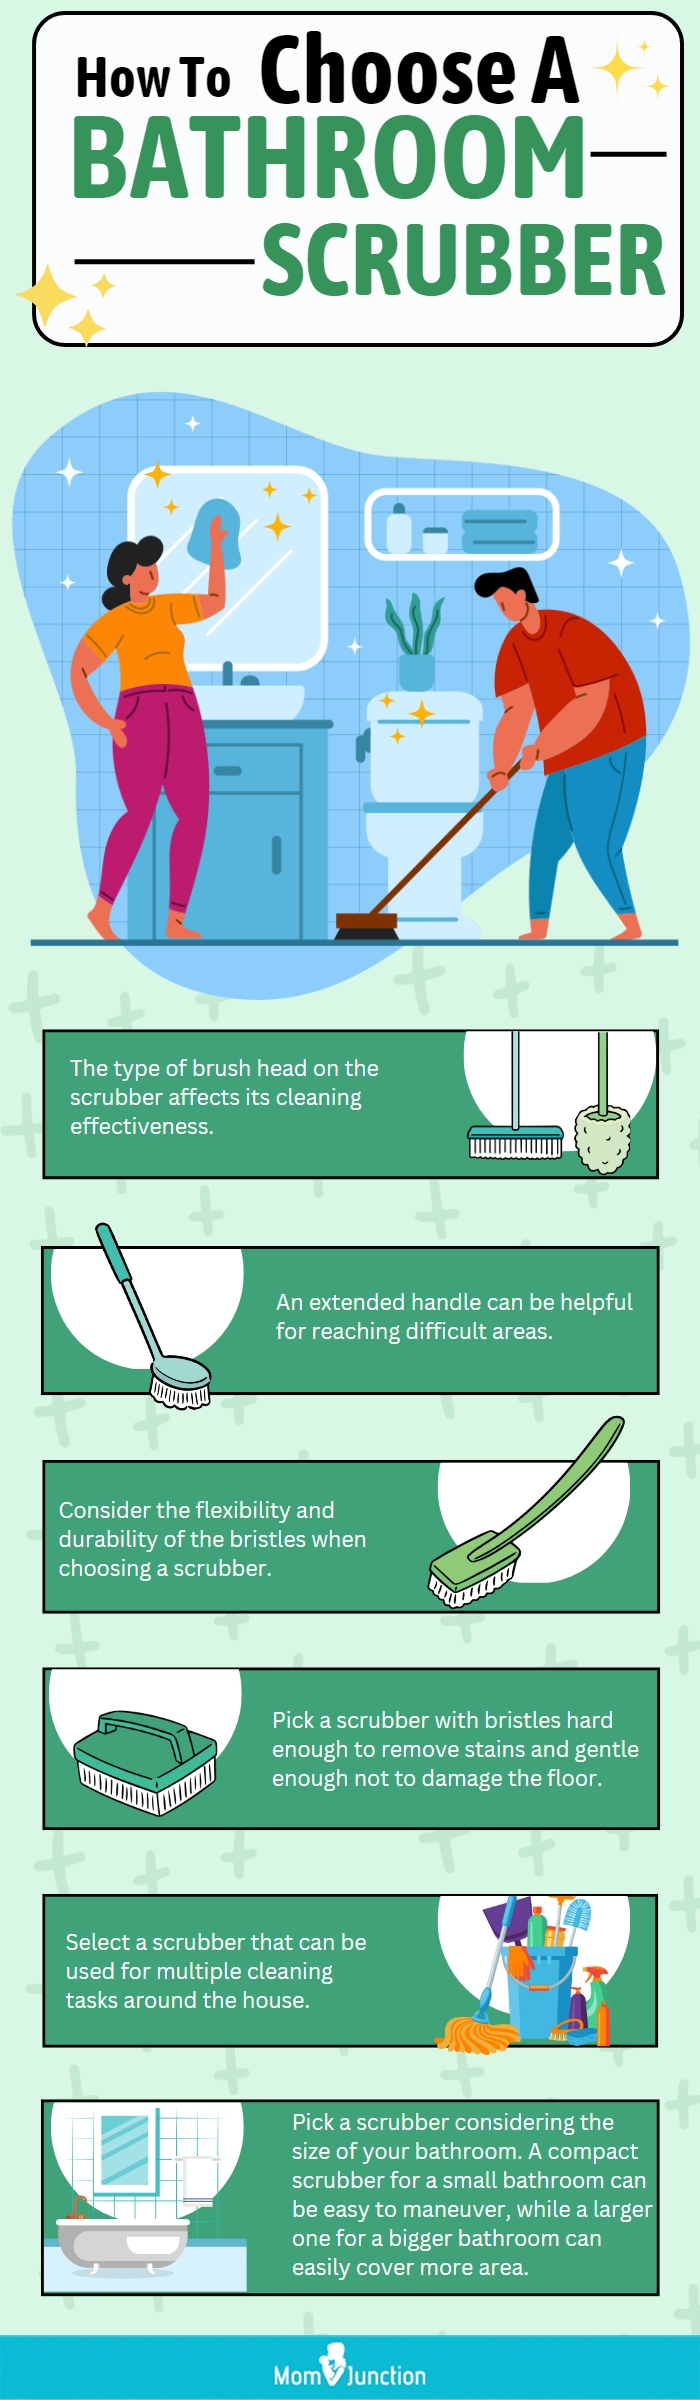 How To Choose A Bathroom Scrubber Row-32 content team [infographic]